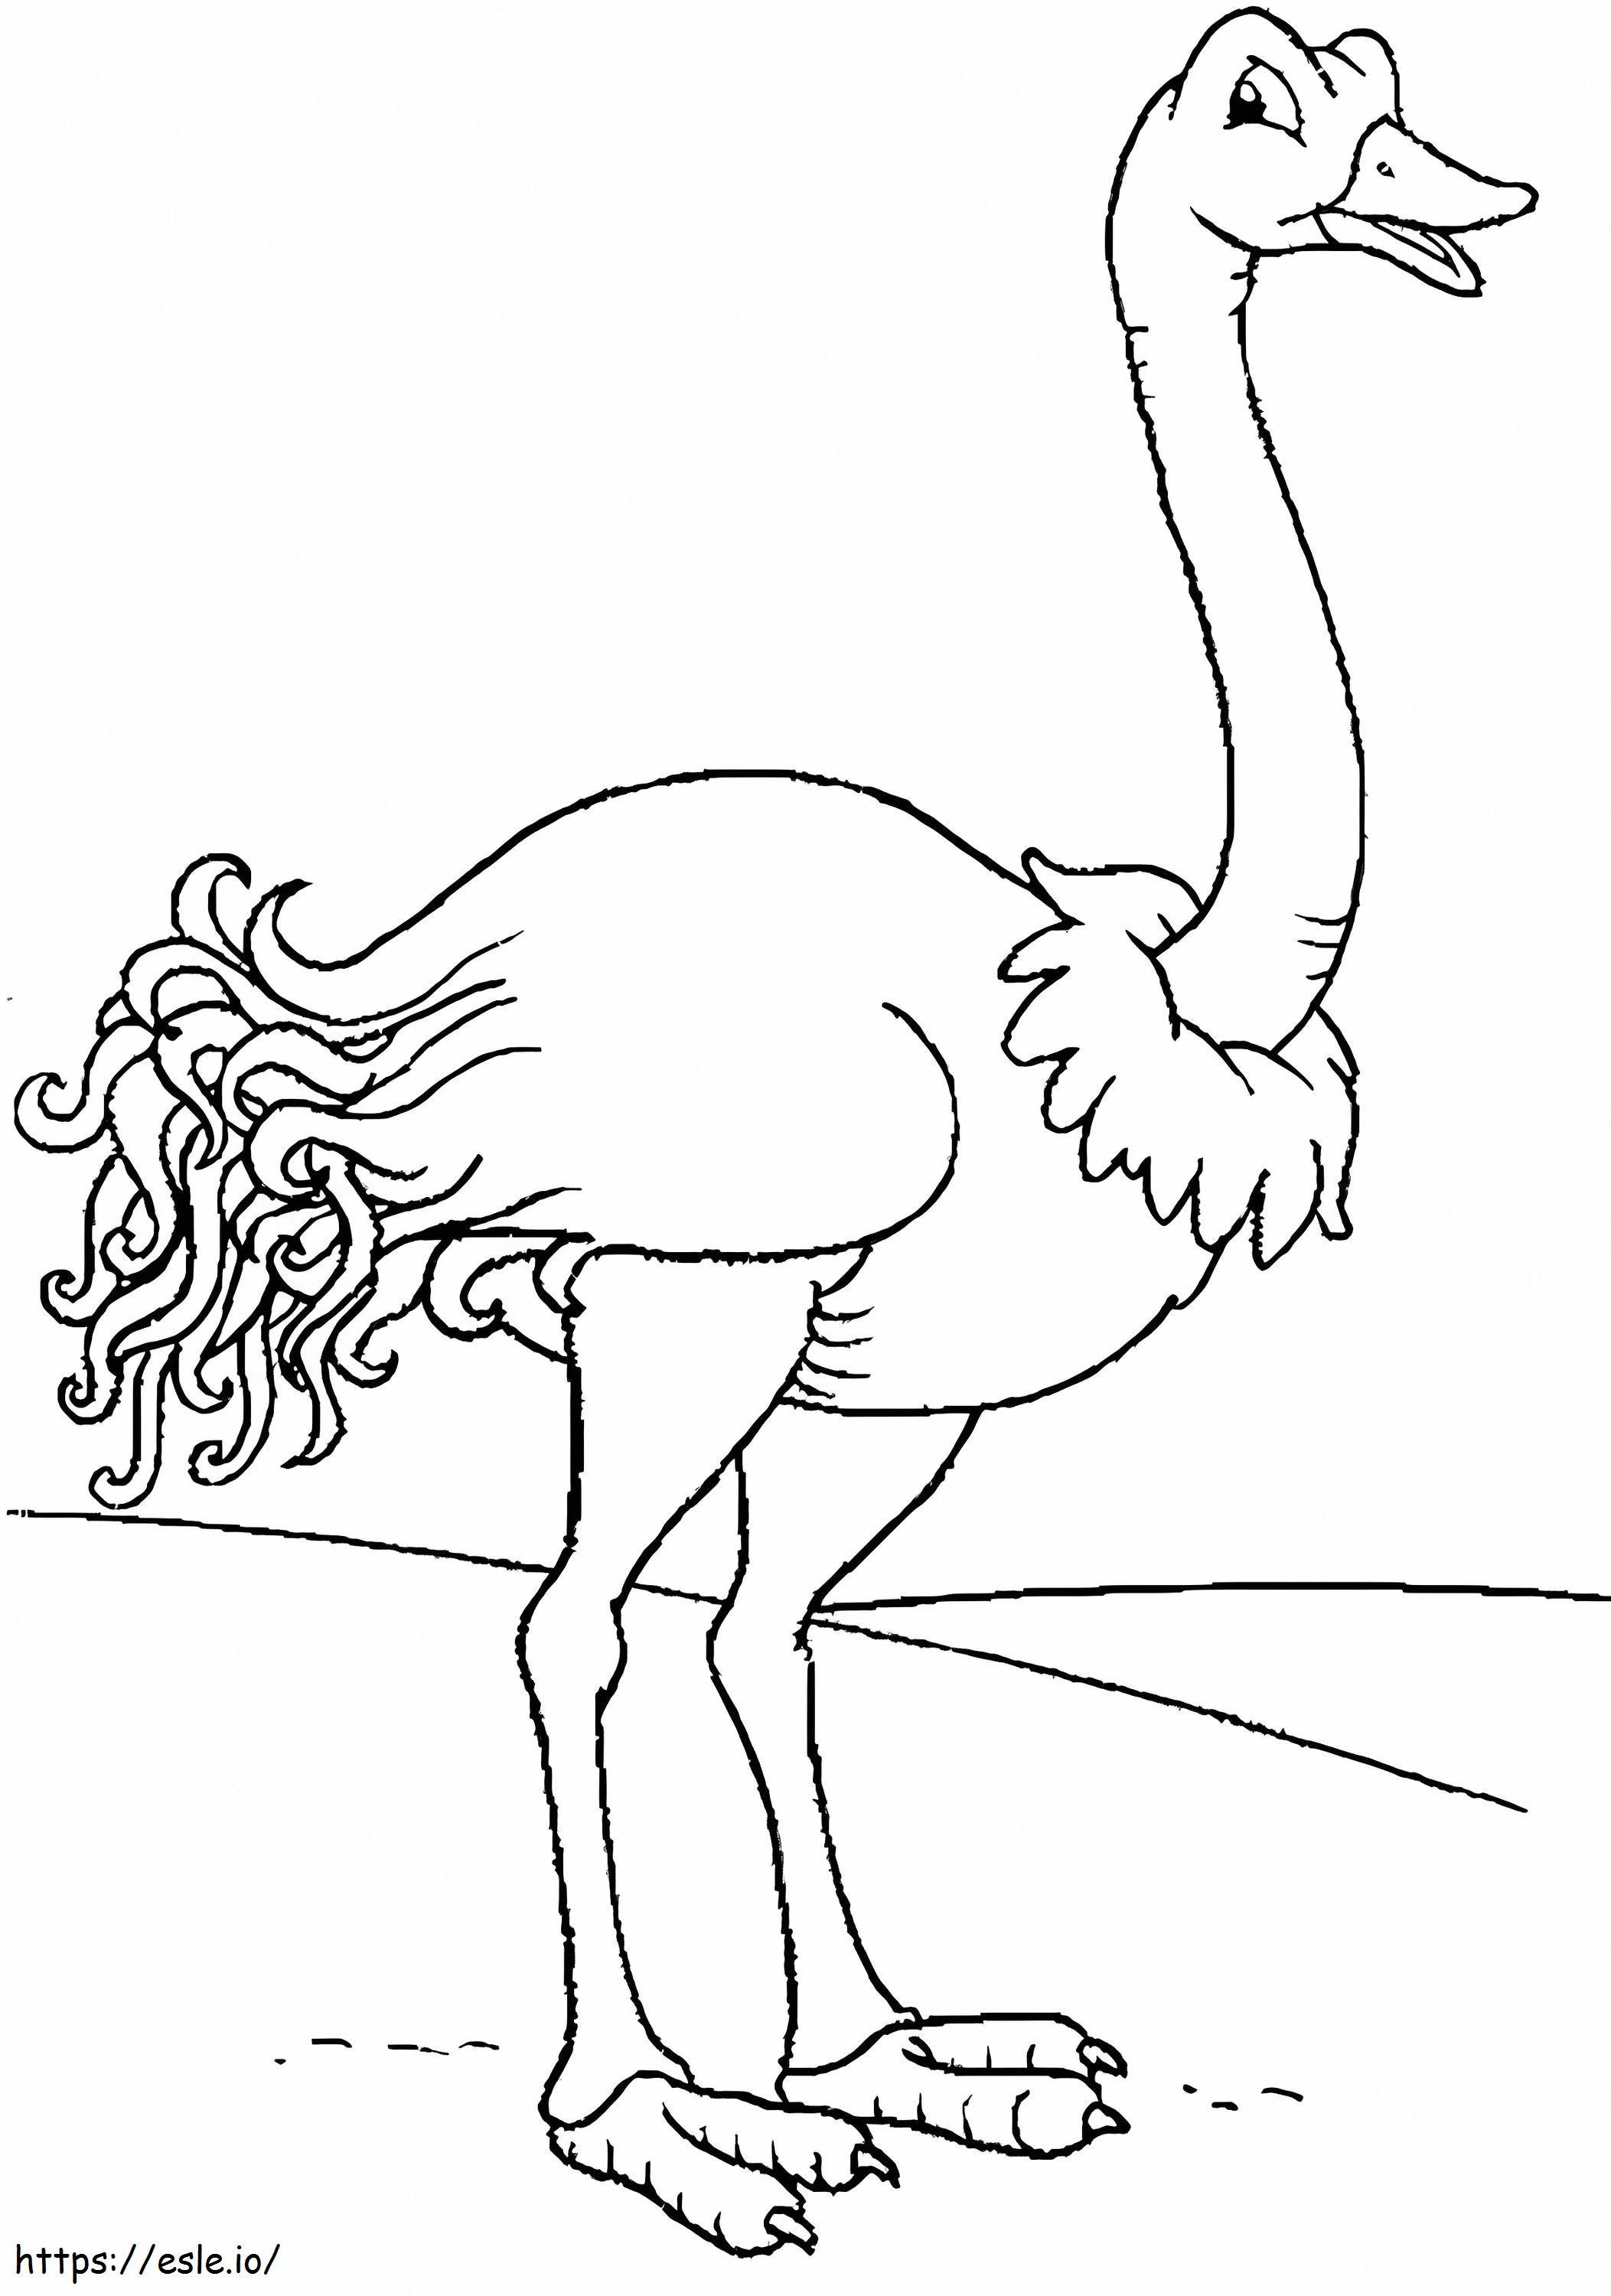 Ostrich 7 coloring page